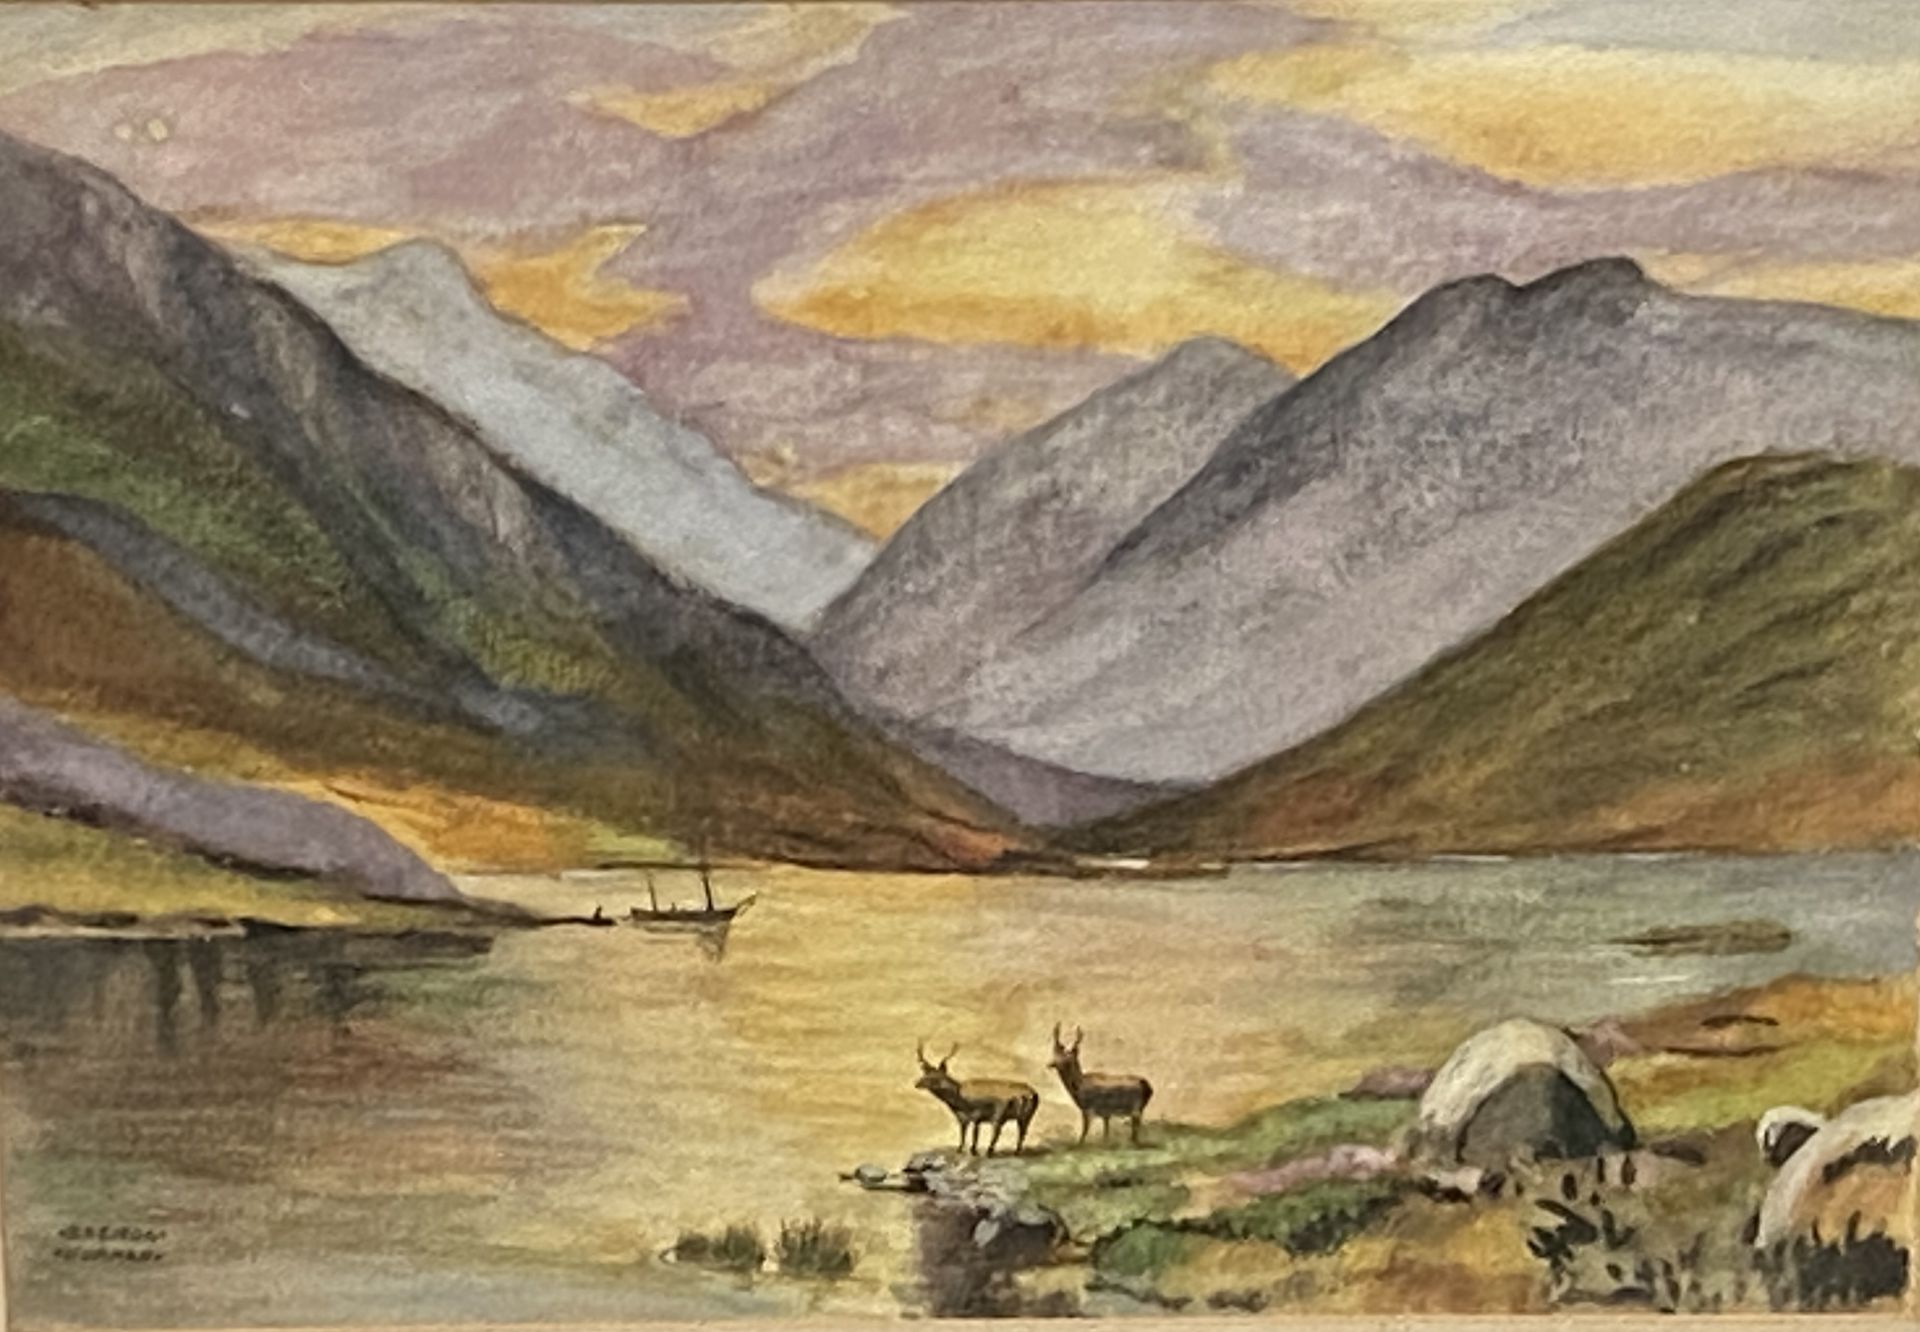 Brenda Norman, framed and glazed watercolour of a Scottish loch